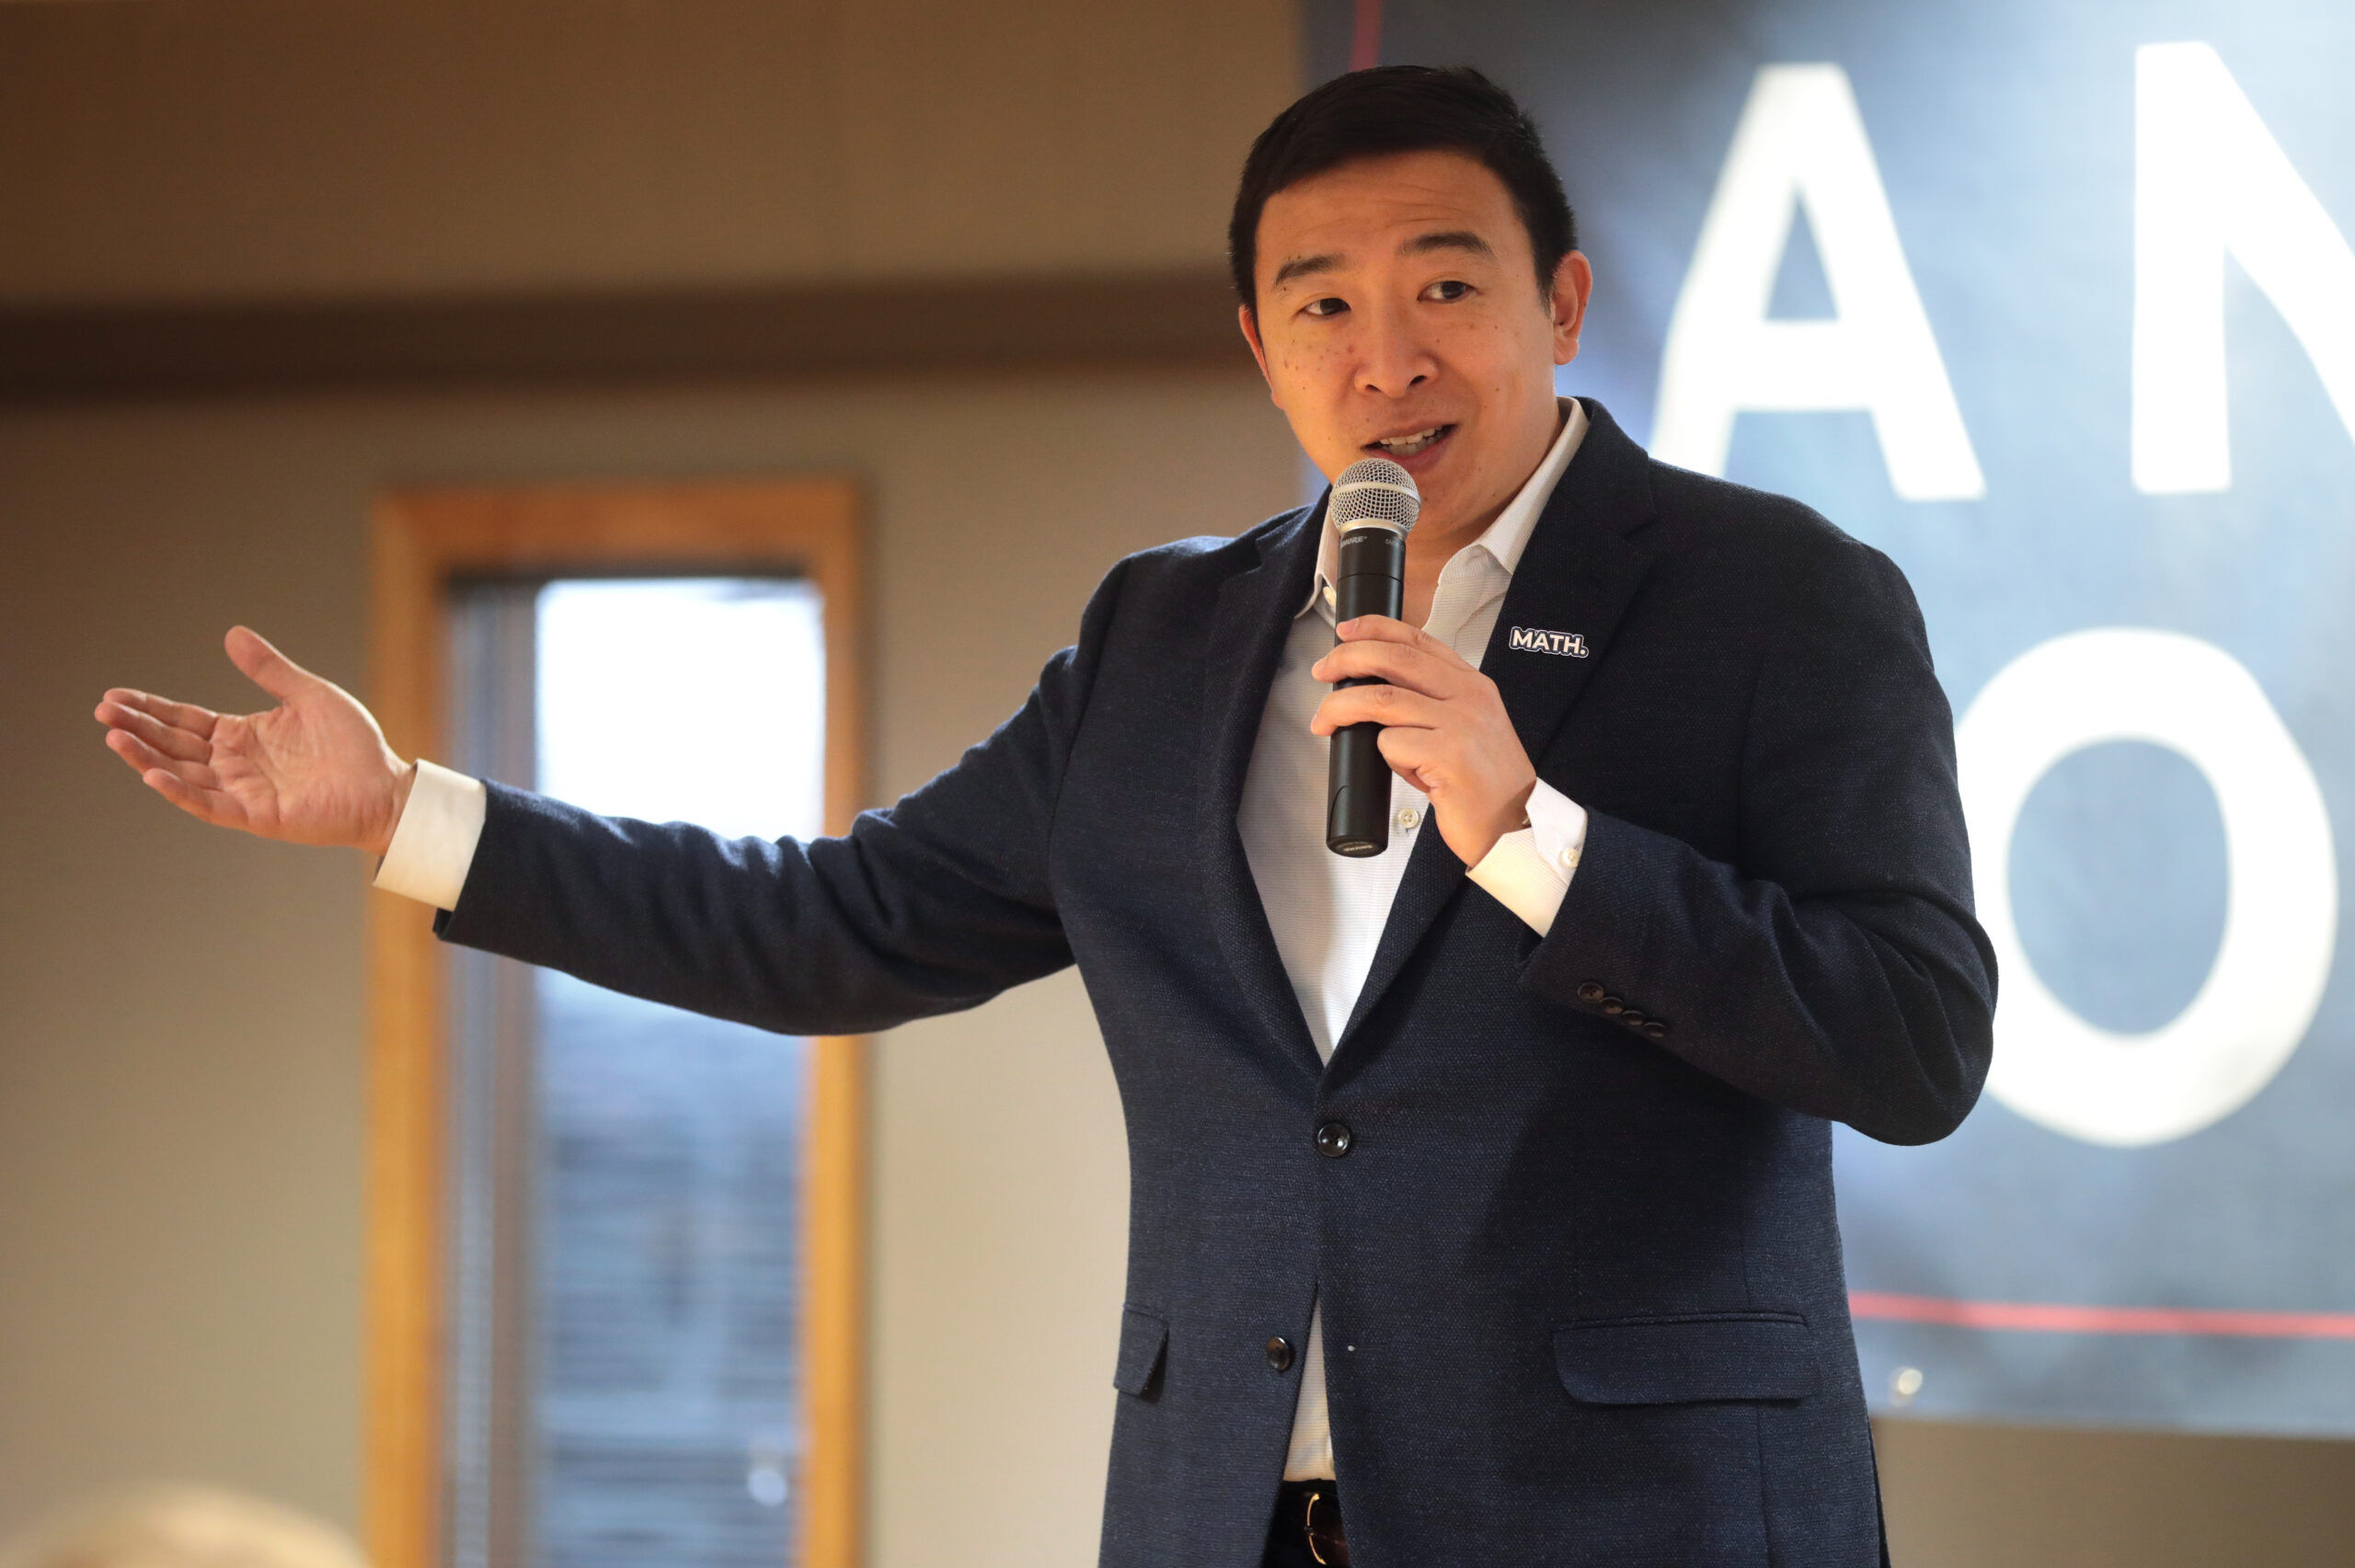 Andrew Yang speaking with supporters at a town hall at the American Legion Post 111 in Newton, Iowa on January 13, 2020